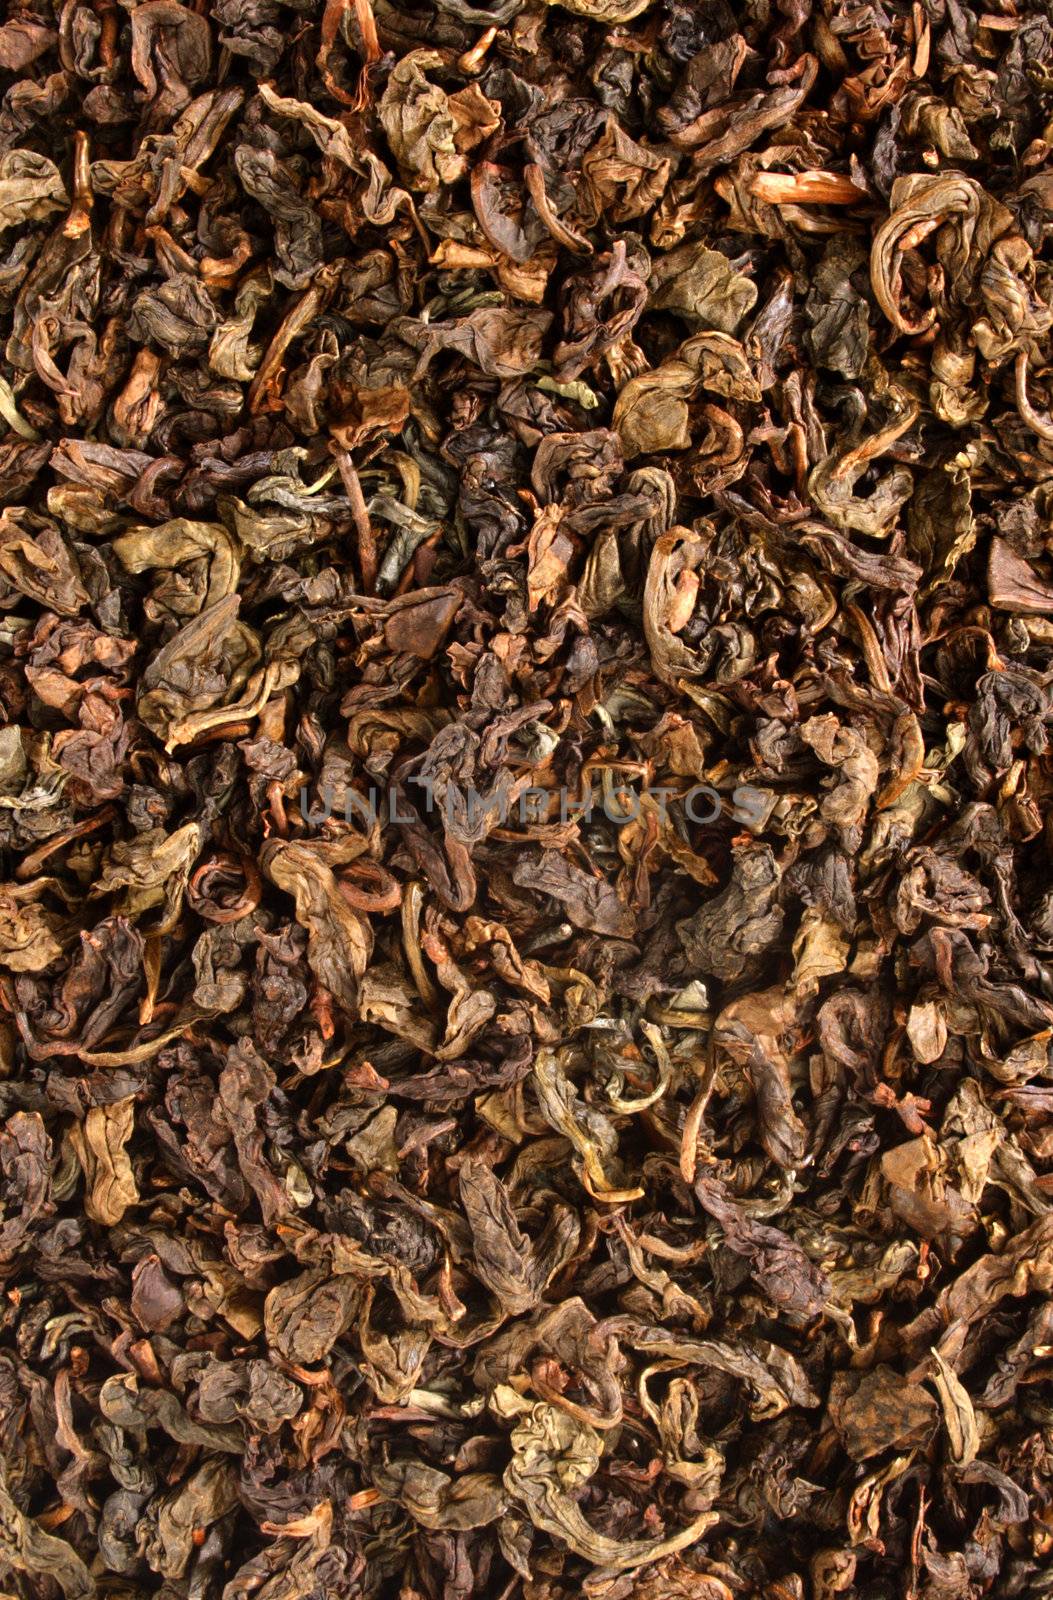 Oolong tea background by carterphoto